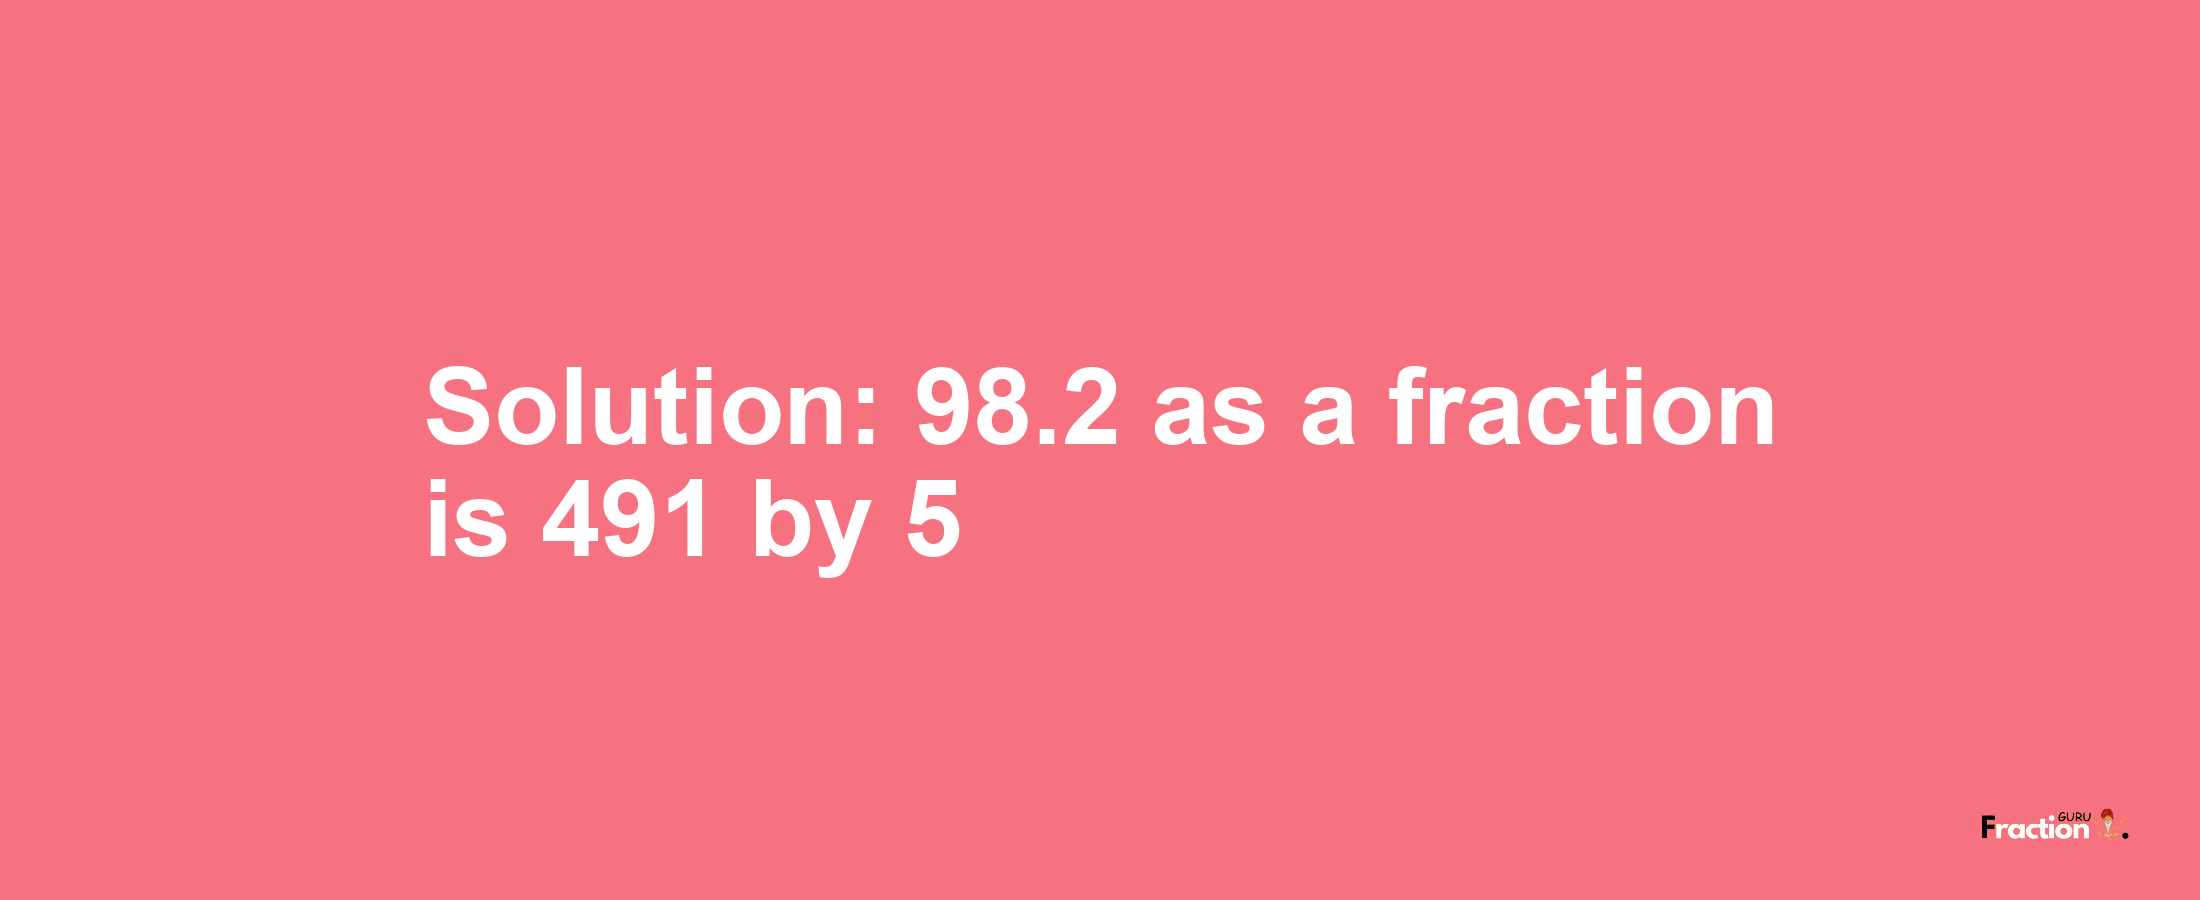 Solution:98.2 as a fraction is 491/5